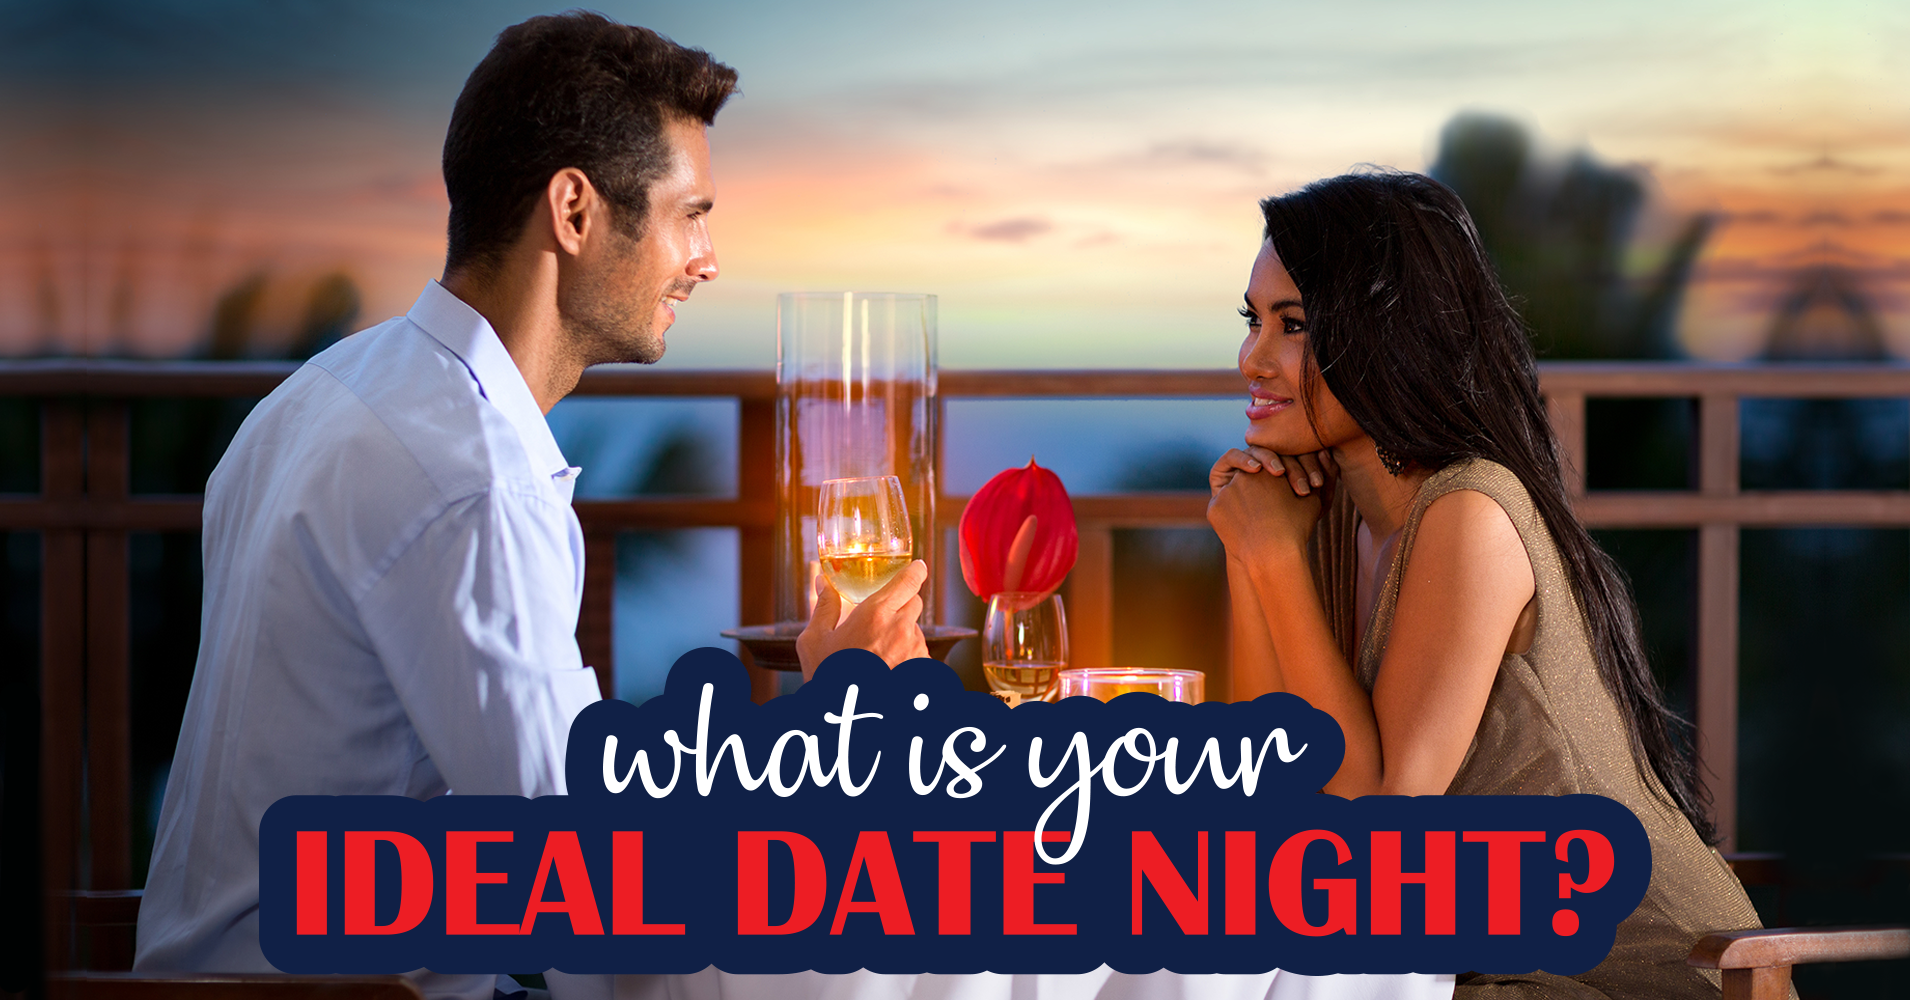 What Is Your Dream Date Night?